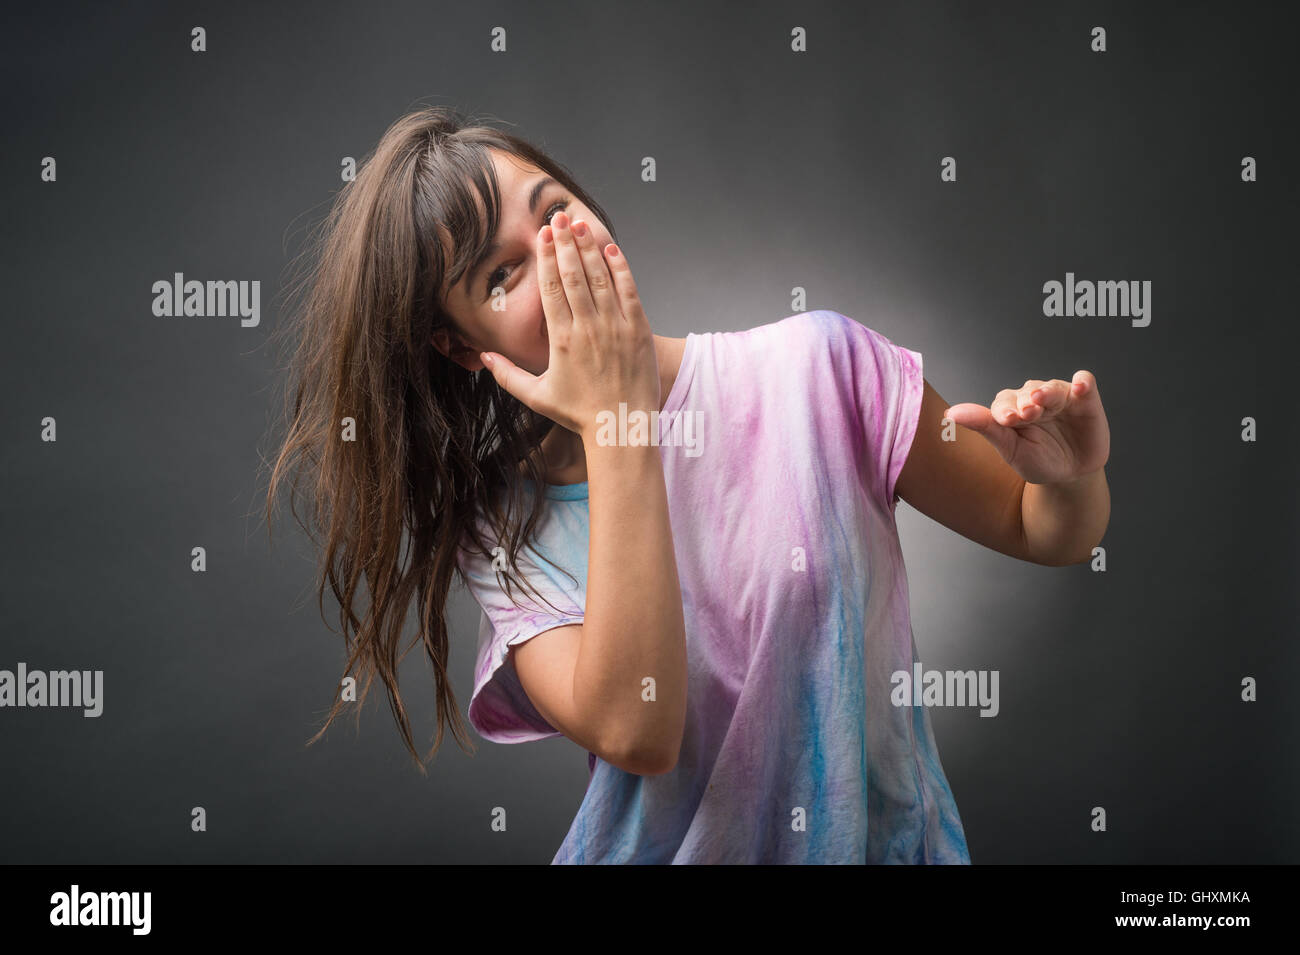 Young woman with hand over mouth Stock Photo